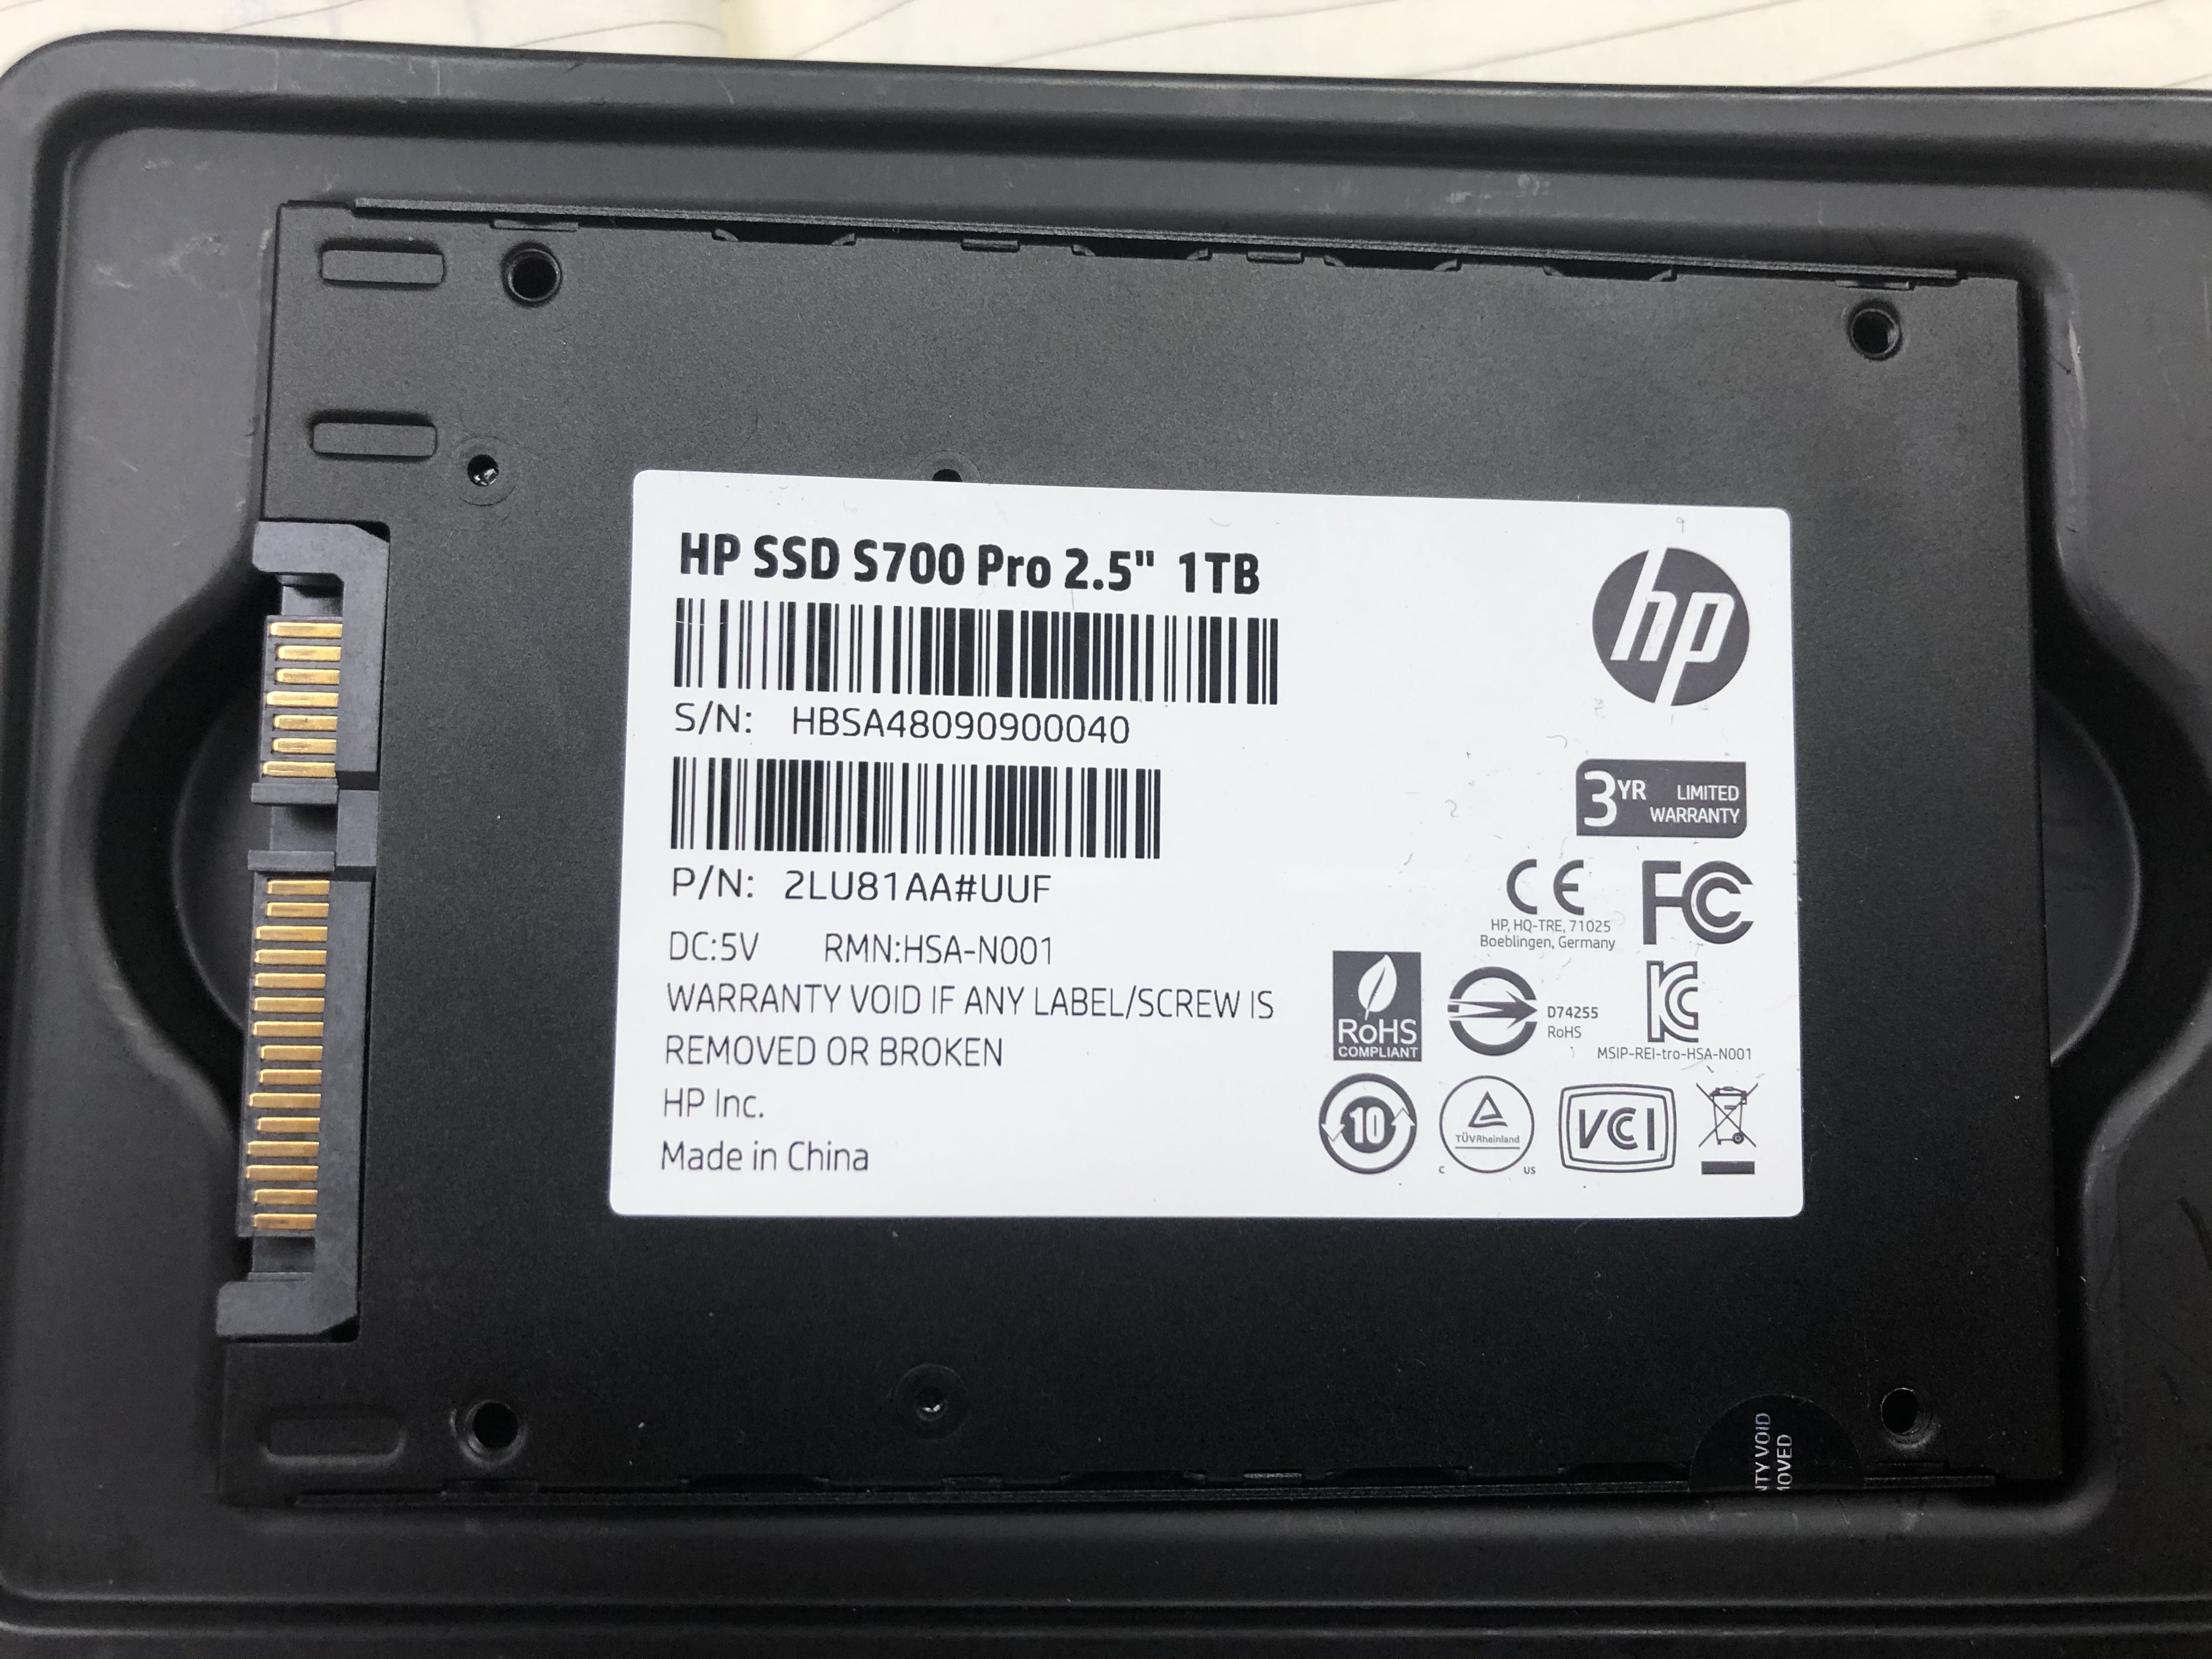 HP SSD S700 Pro 2.5" 1TB - HP Support Community - 7593726